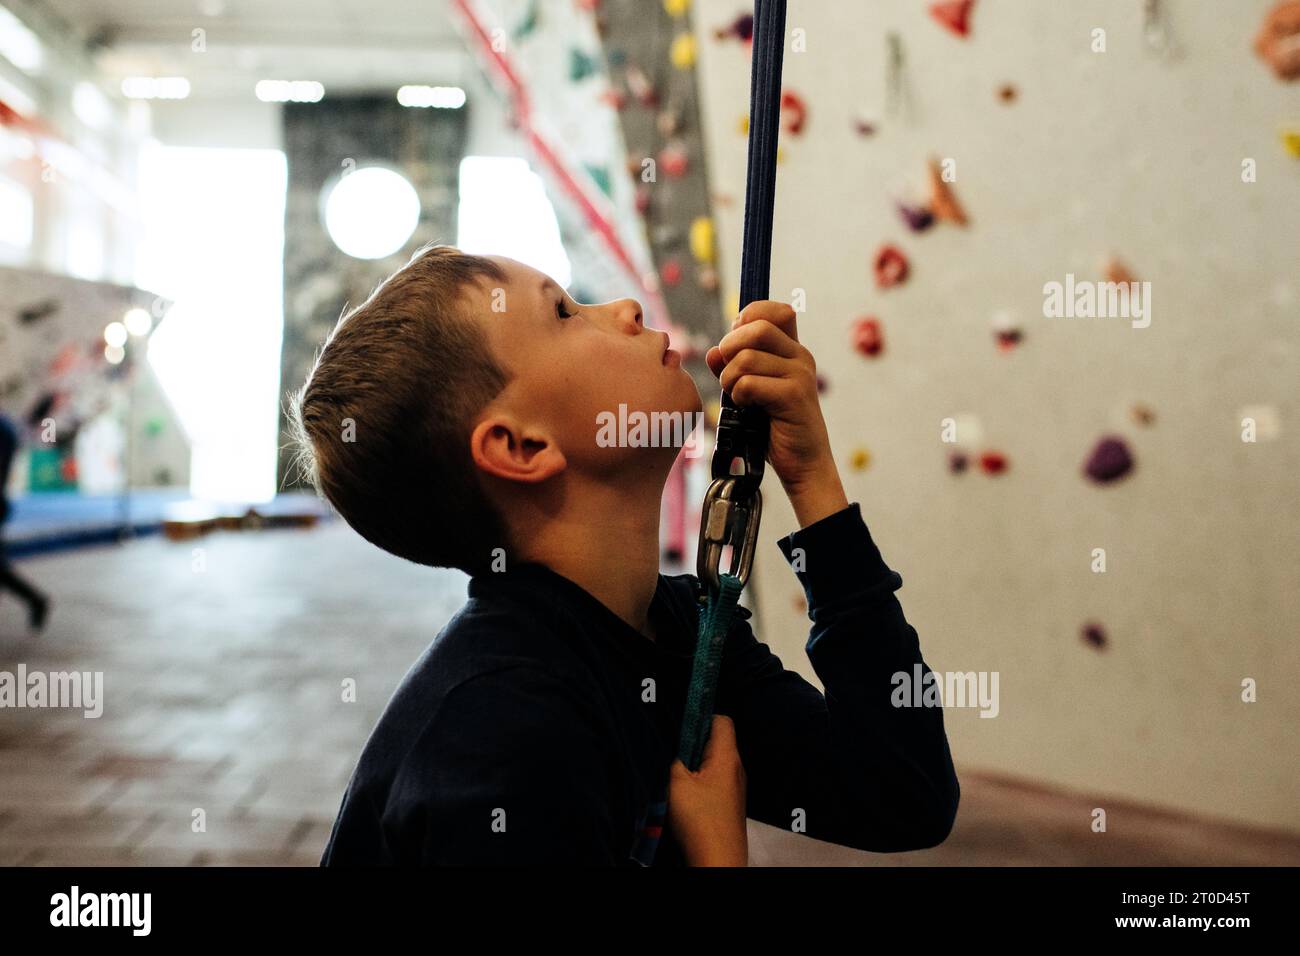 child holding onto a climbing rope ready to climb a wall indoors Stock Photo